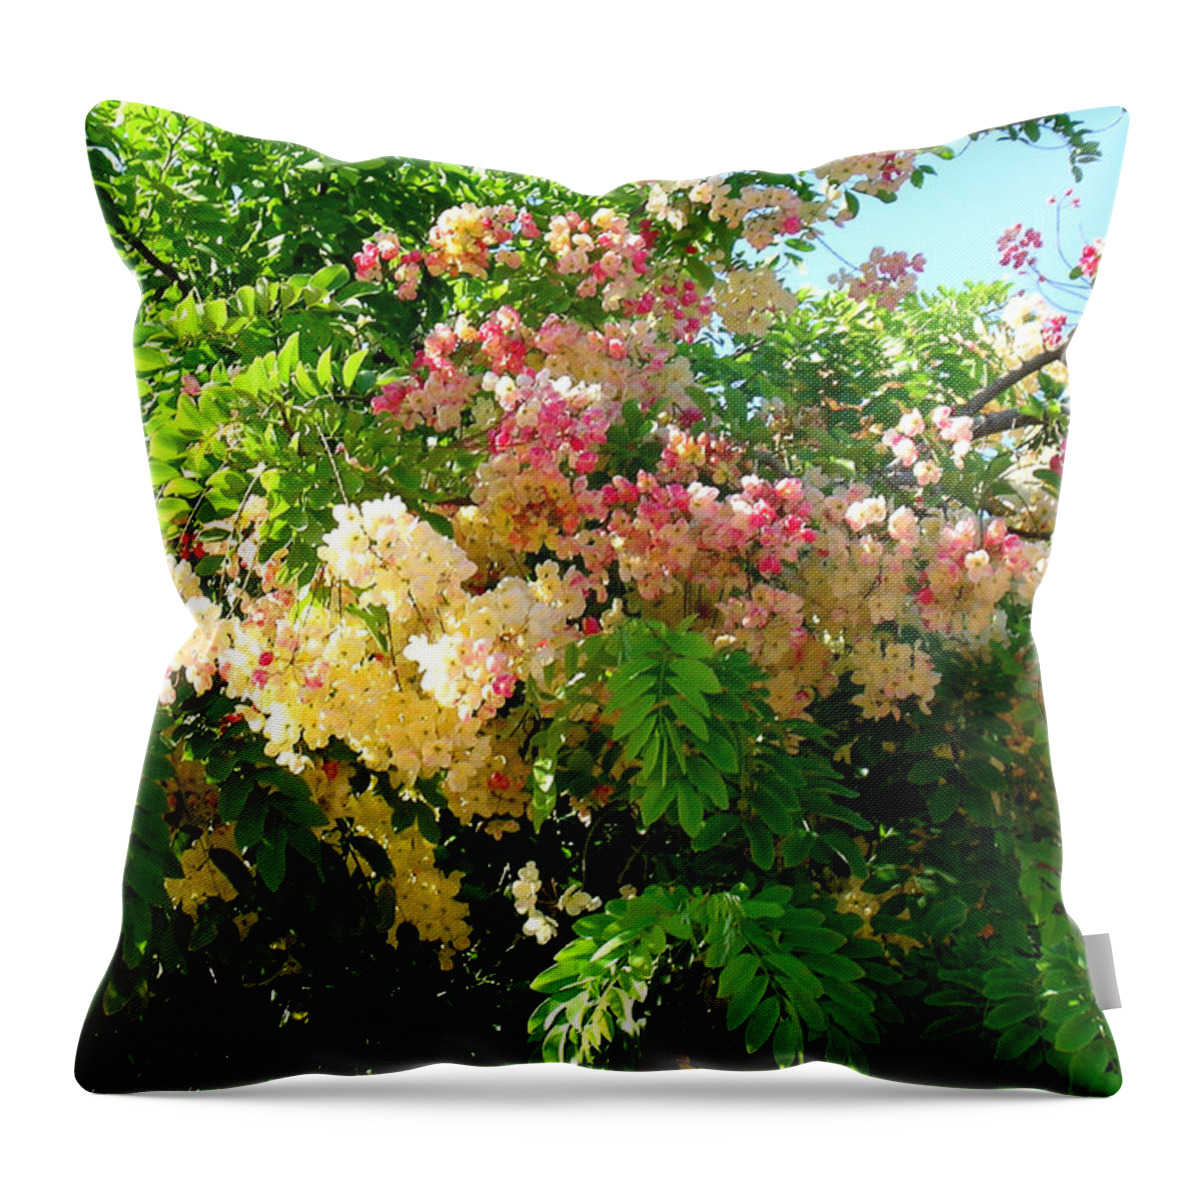 Rainbow Shower Tree Throw Pillow featuring the photograph Hawaii Rainbow Shower Tree by James Temple